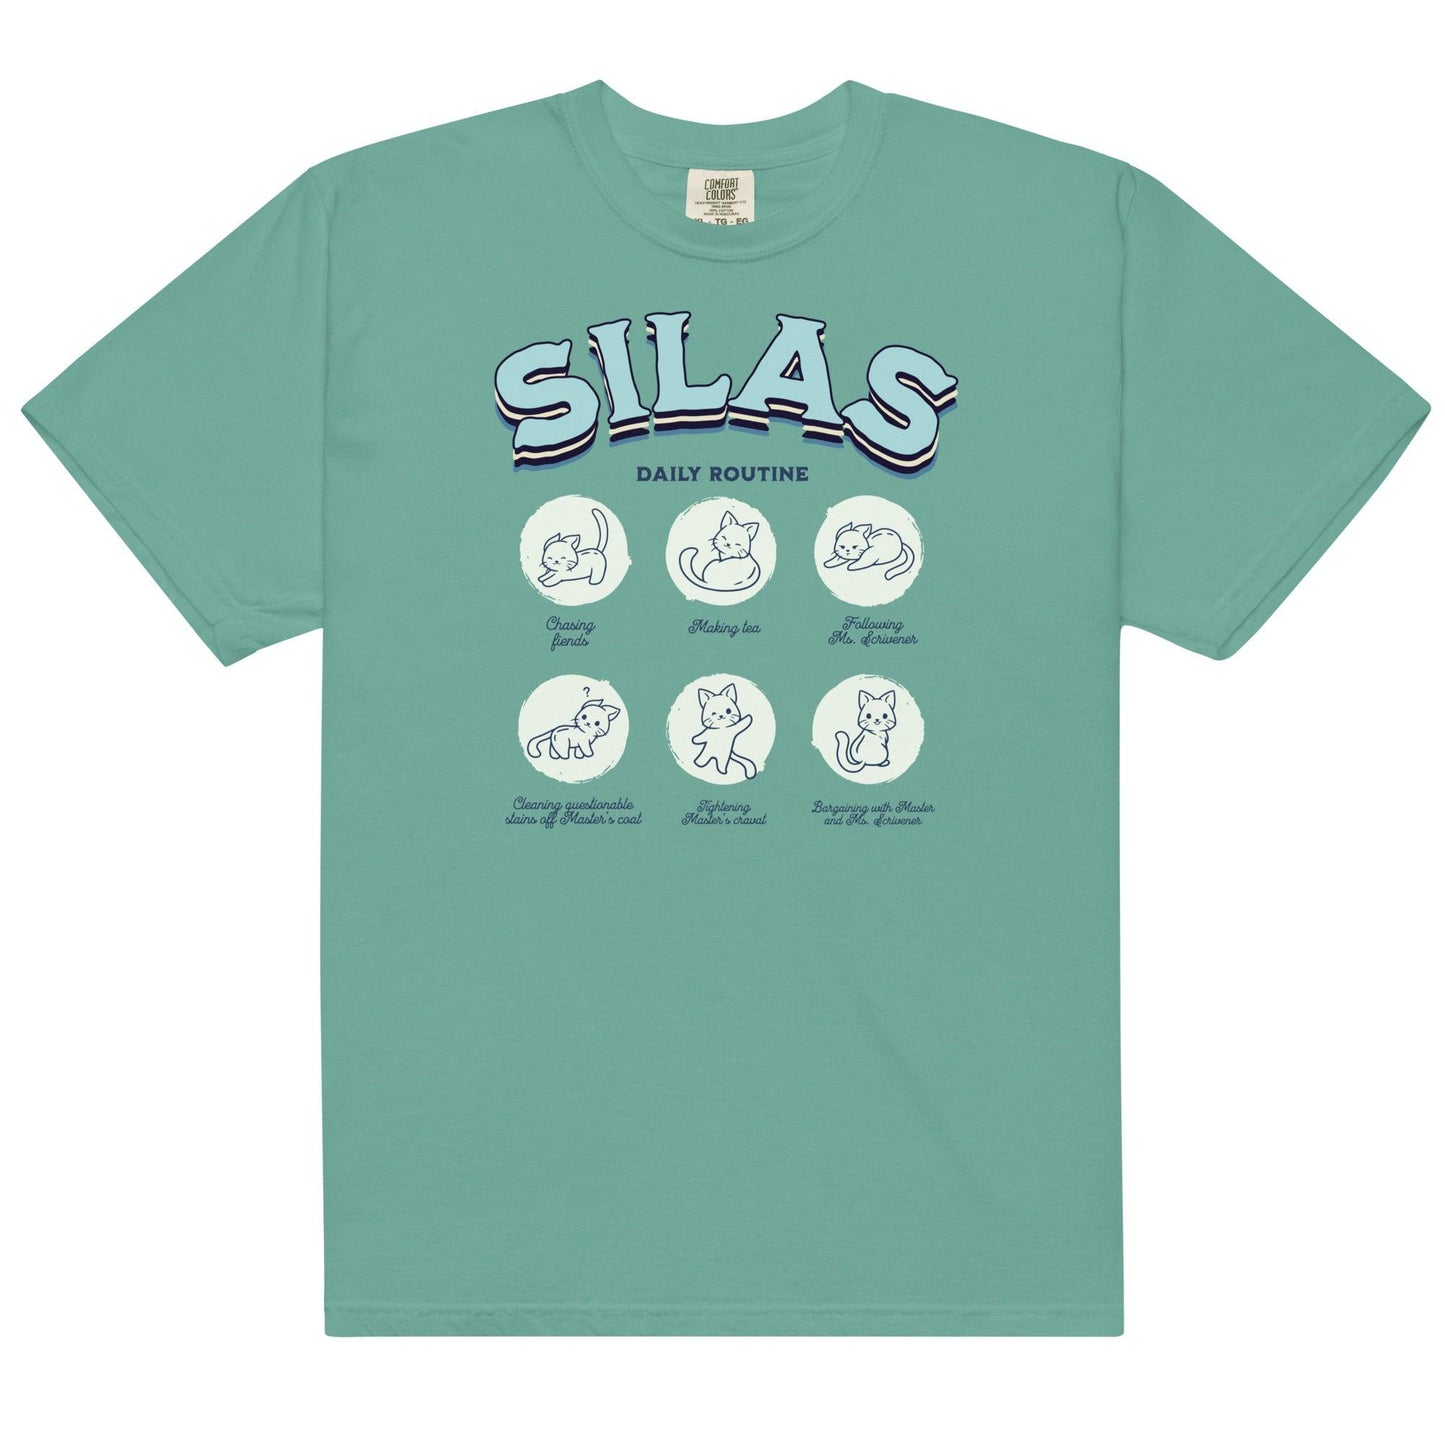 Silas Daily Routine Tee Shirt - The Bean Workshop - box tee, margaret rogerson, sorcery of thorns